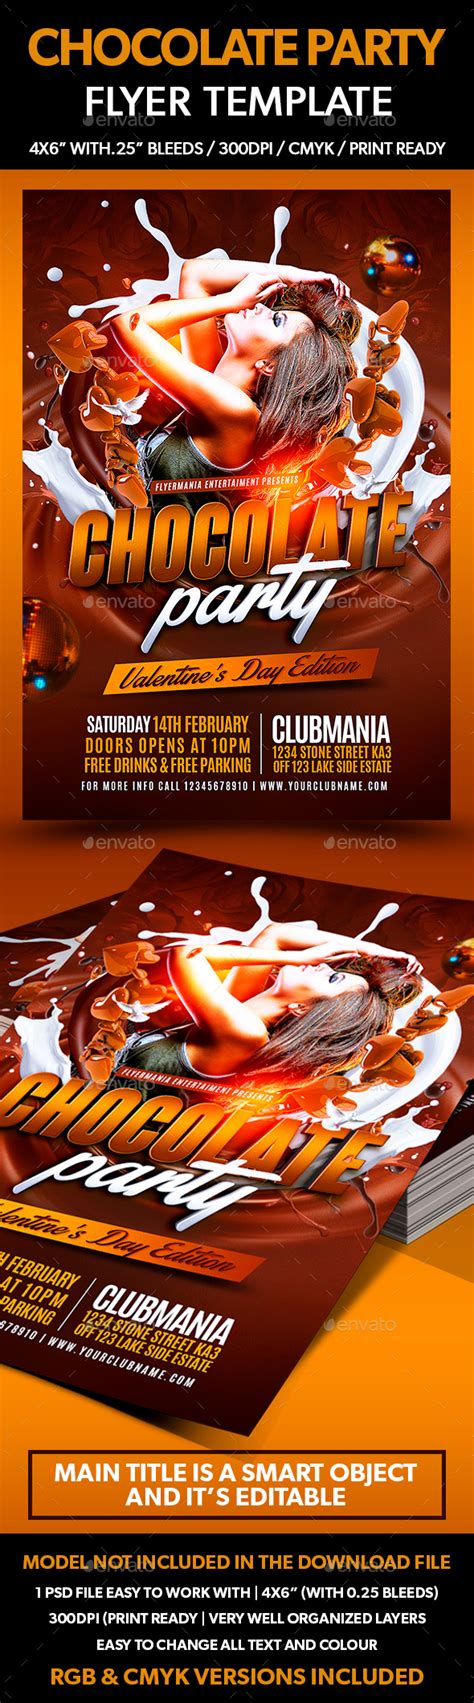 Chocolate Party Flyer Template By Flyermania Graphicriver